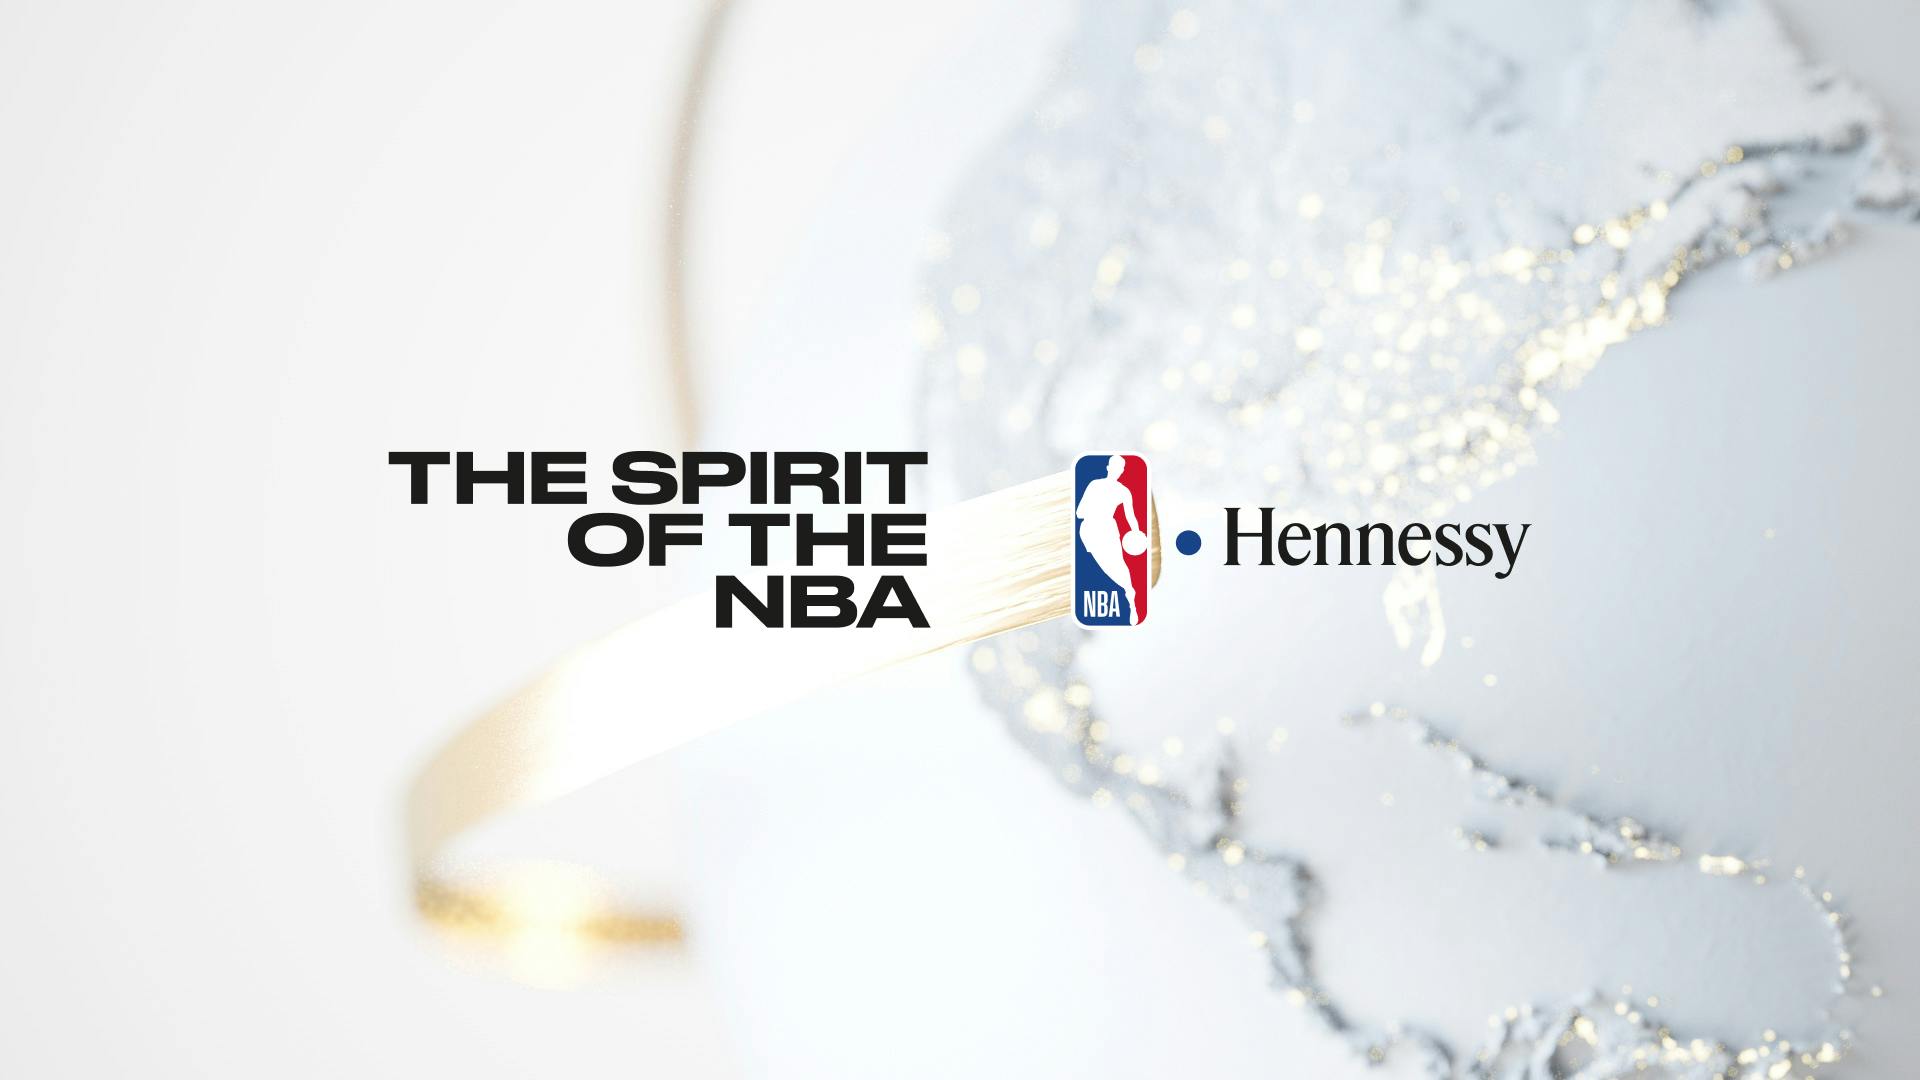 In the foreground, we have the Spirit of the NBA logo featuring the NBA x Hennessy collaboration logo. In the background, we see the 3D Earth planet in an all-white version.